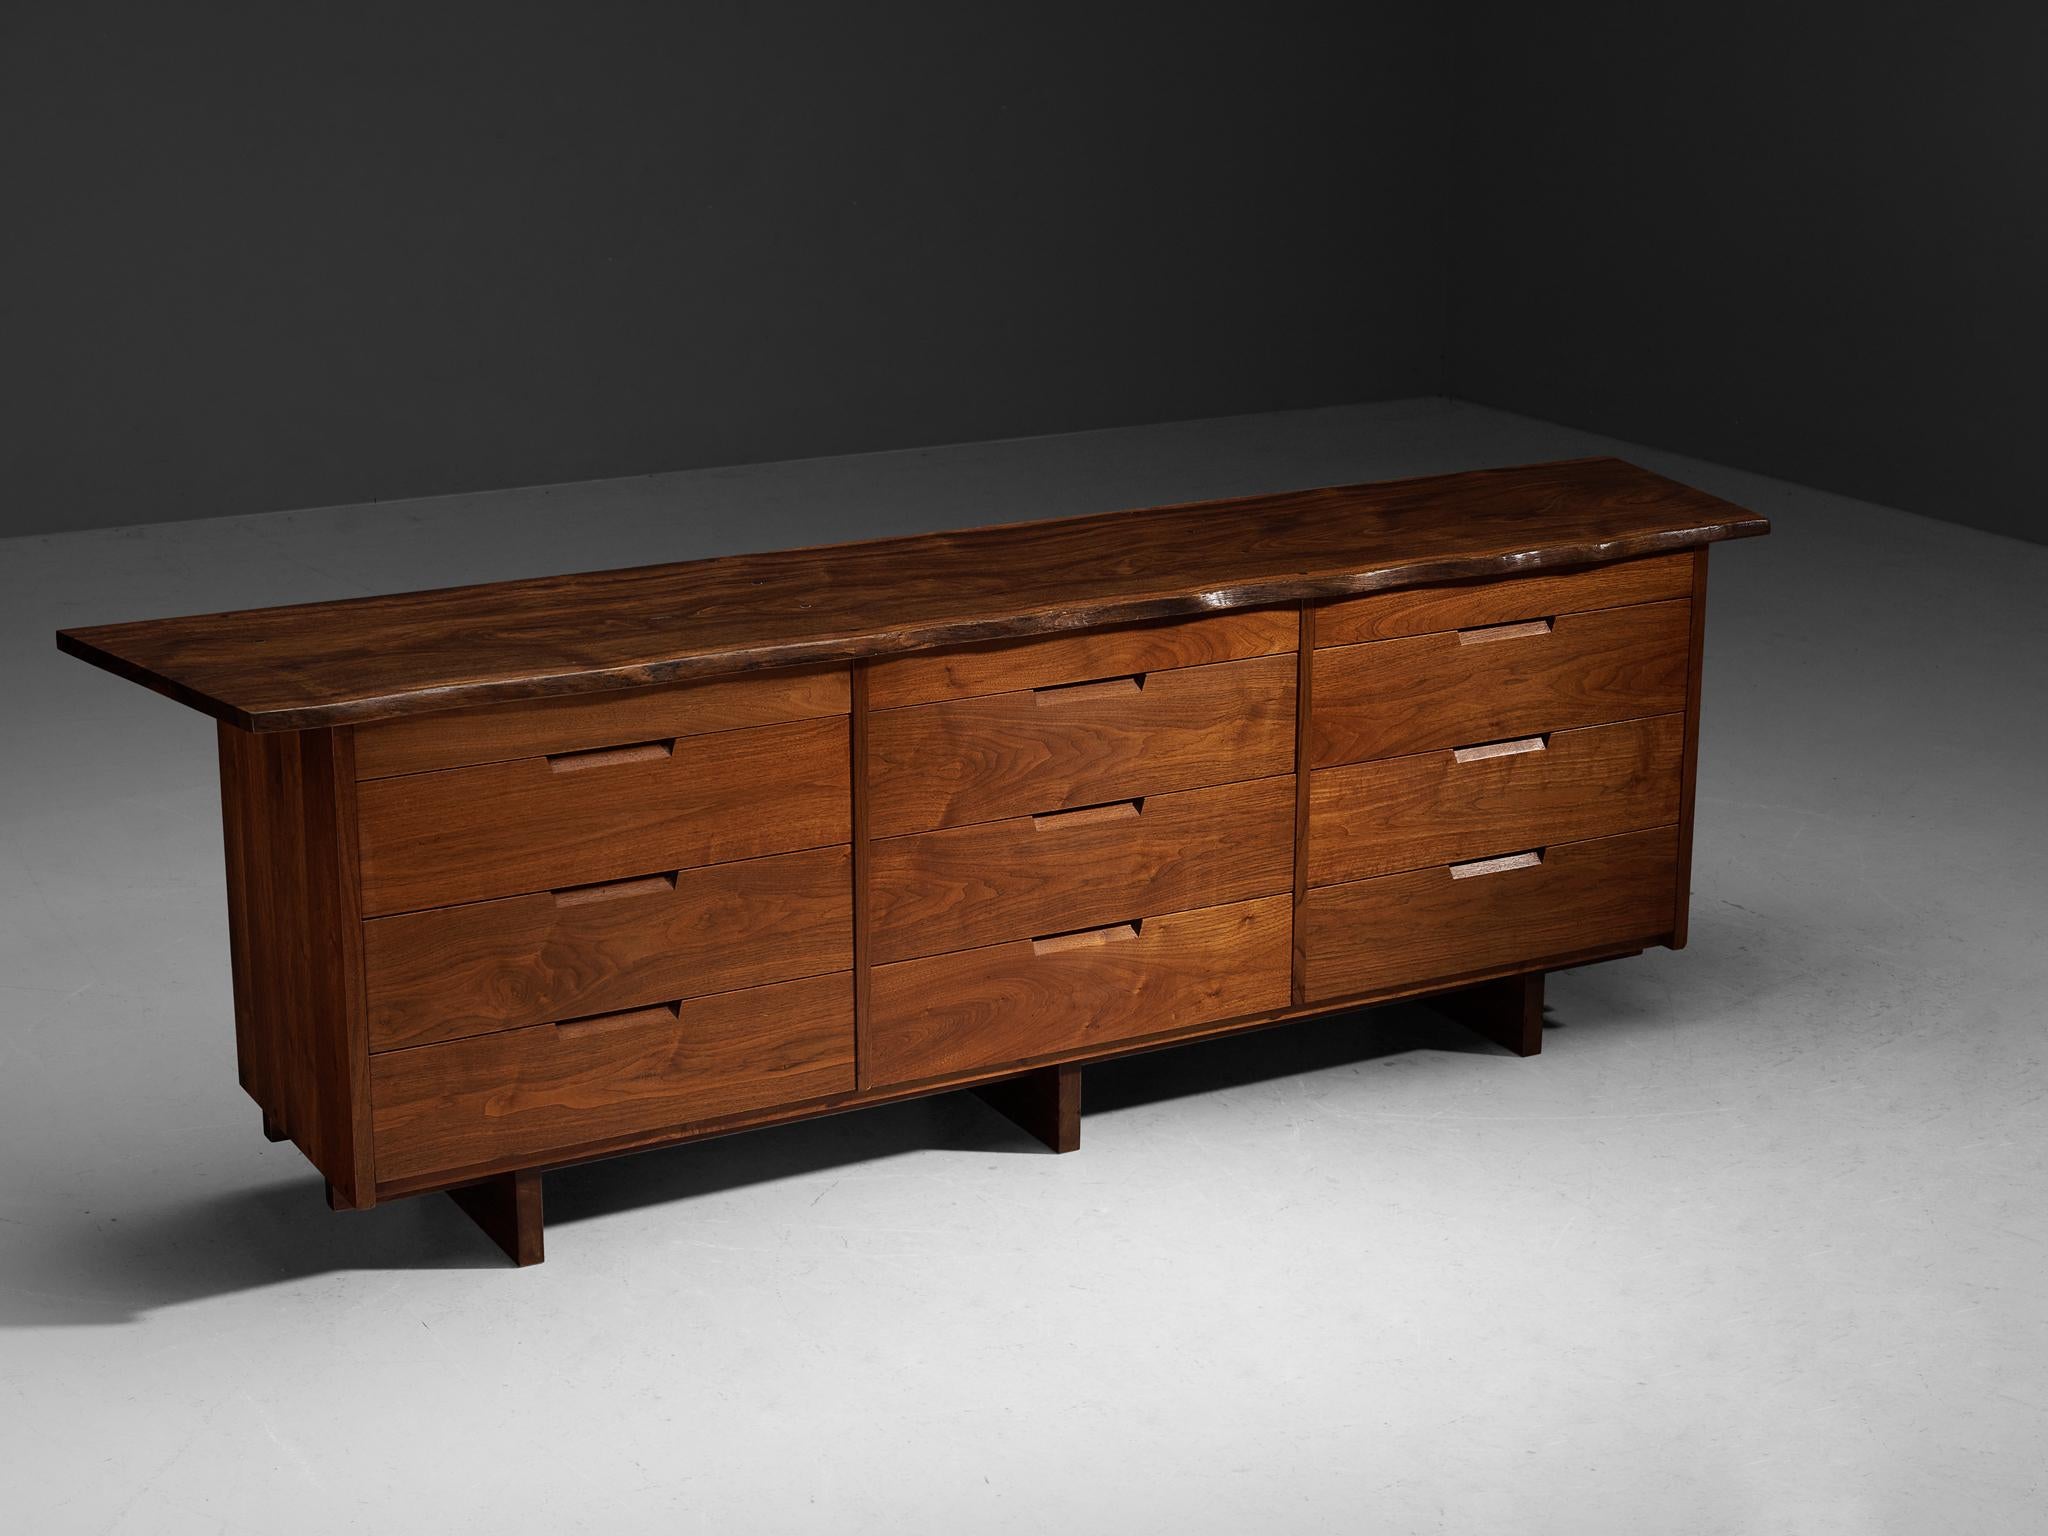 George Nakashima, triple chest of drawers or sideboard, American black walnut, Indian laurel, United States, 1964

With regard to its essential form, material use, and woodwork, this chest of drawers is a testimony to George Nakashima's expert